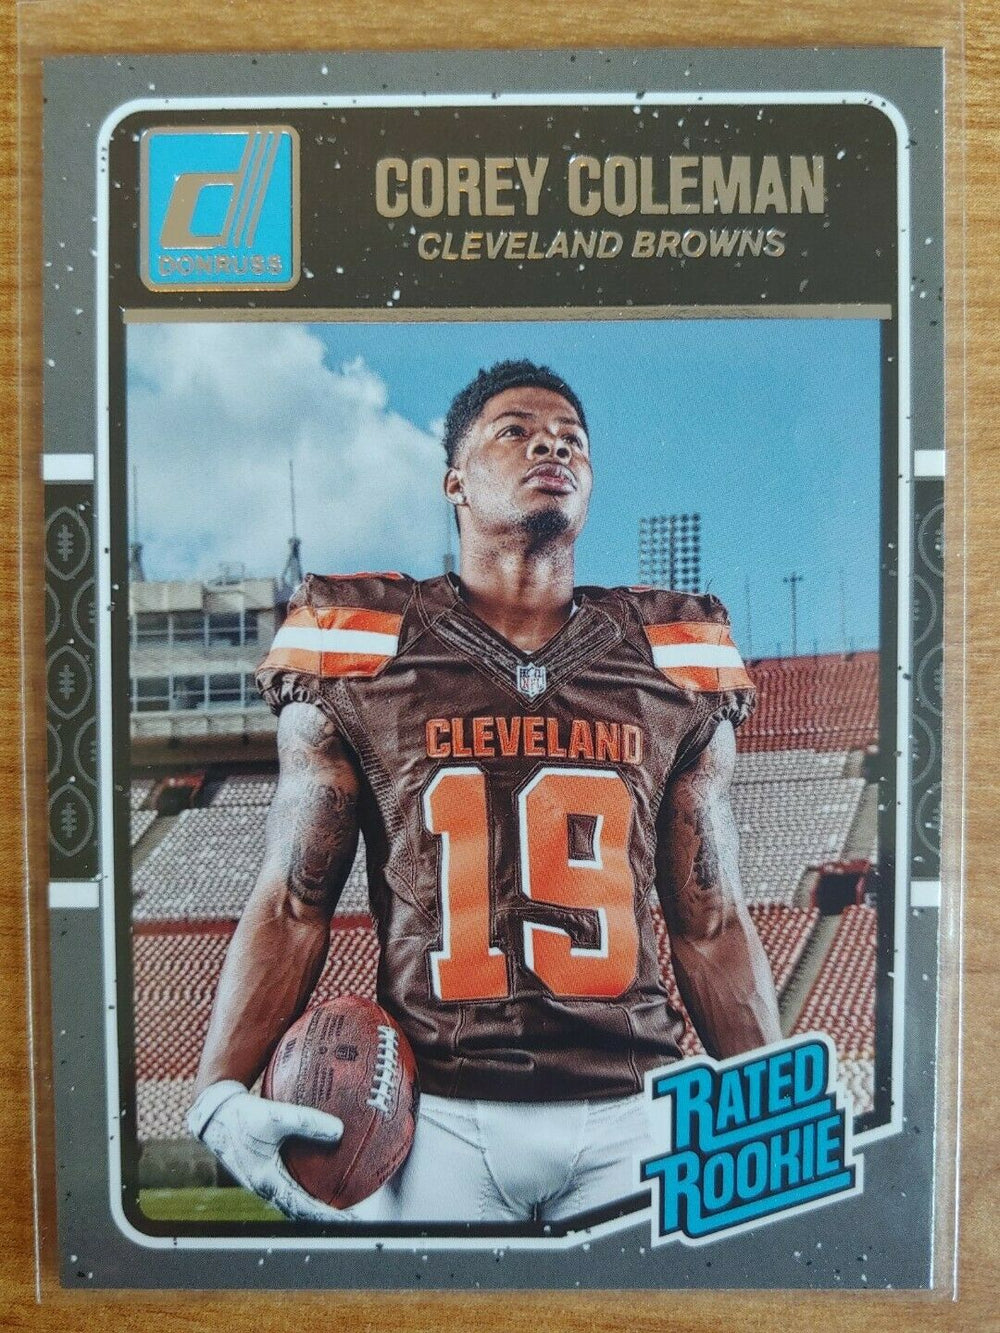 Corey Coleman 2016 Donruss Rated Rookie Series Mint ROOKIE Card #361